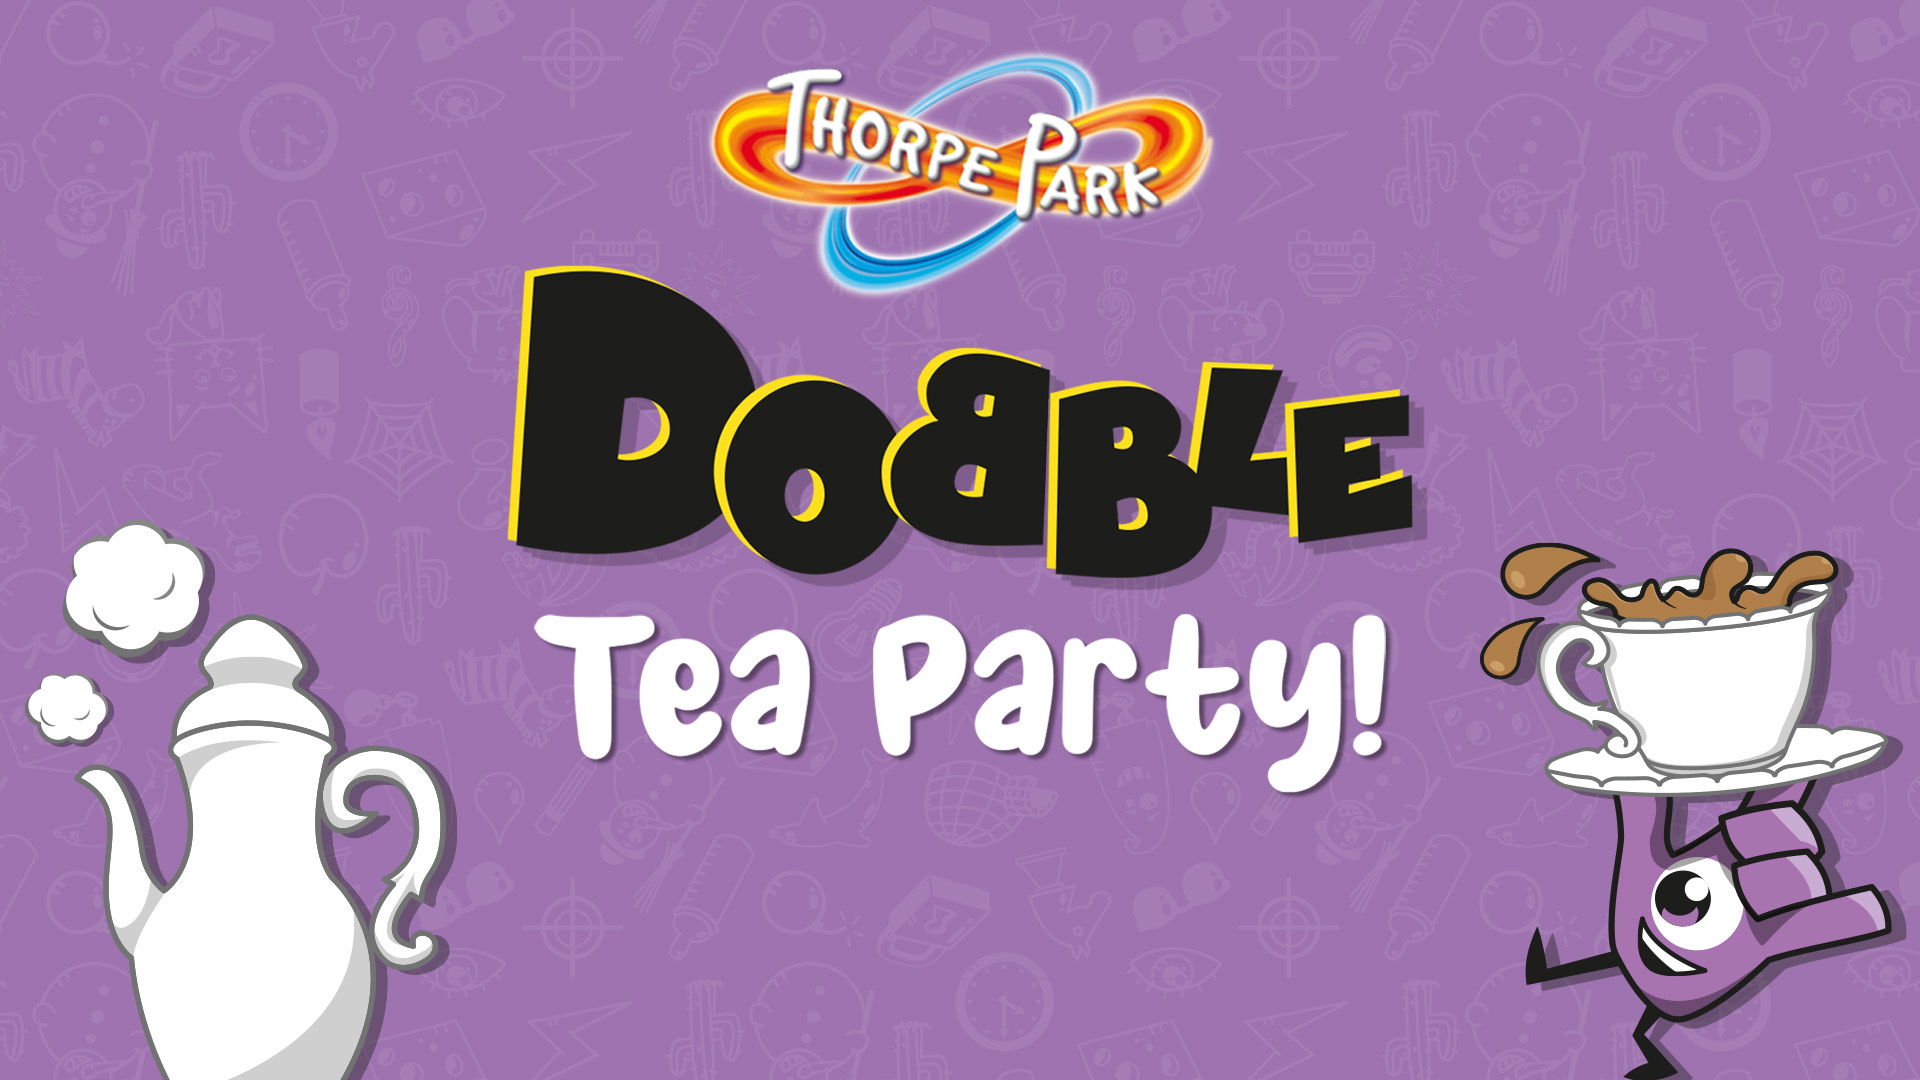 Dobble Tea Party Launches At THORPE PARK Resort